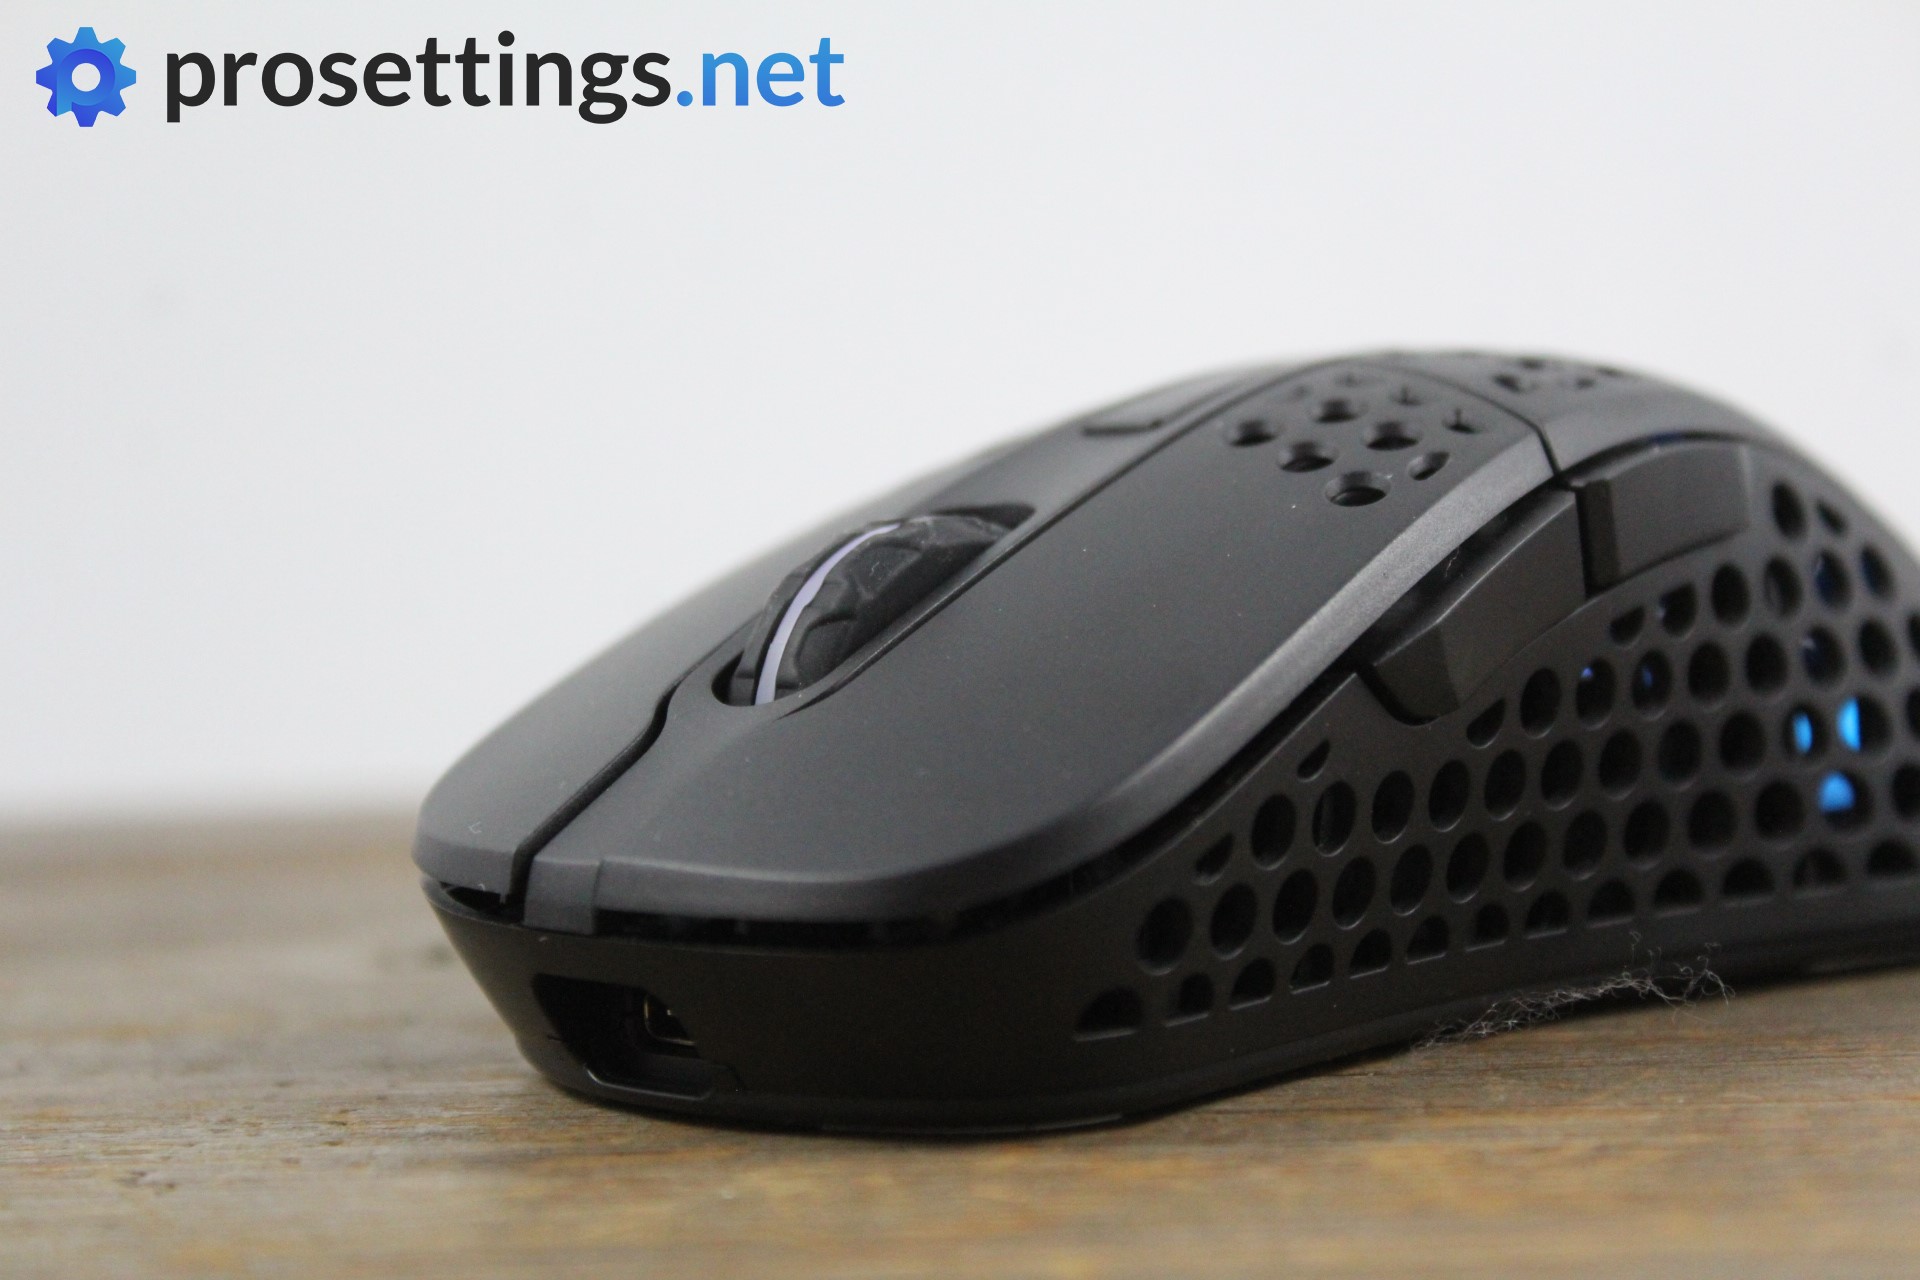 Xtrfy M4 Wireless Review Buttons and Scroll